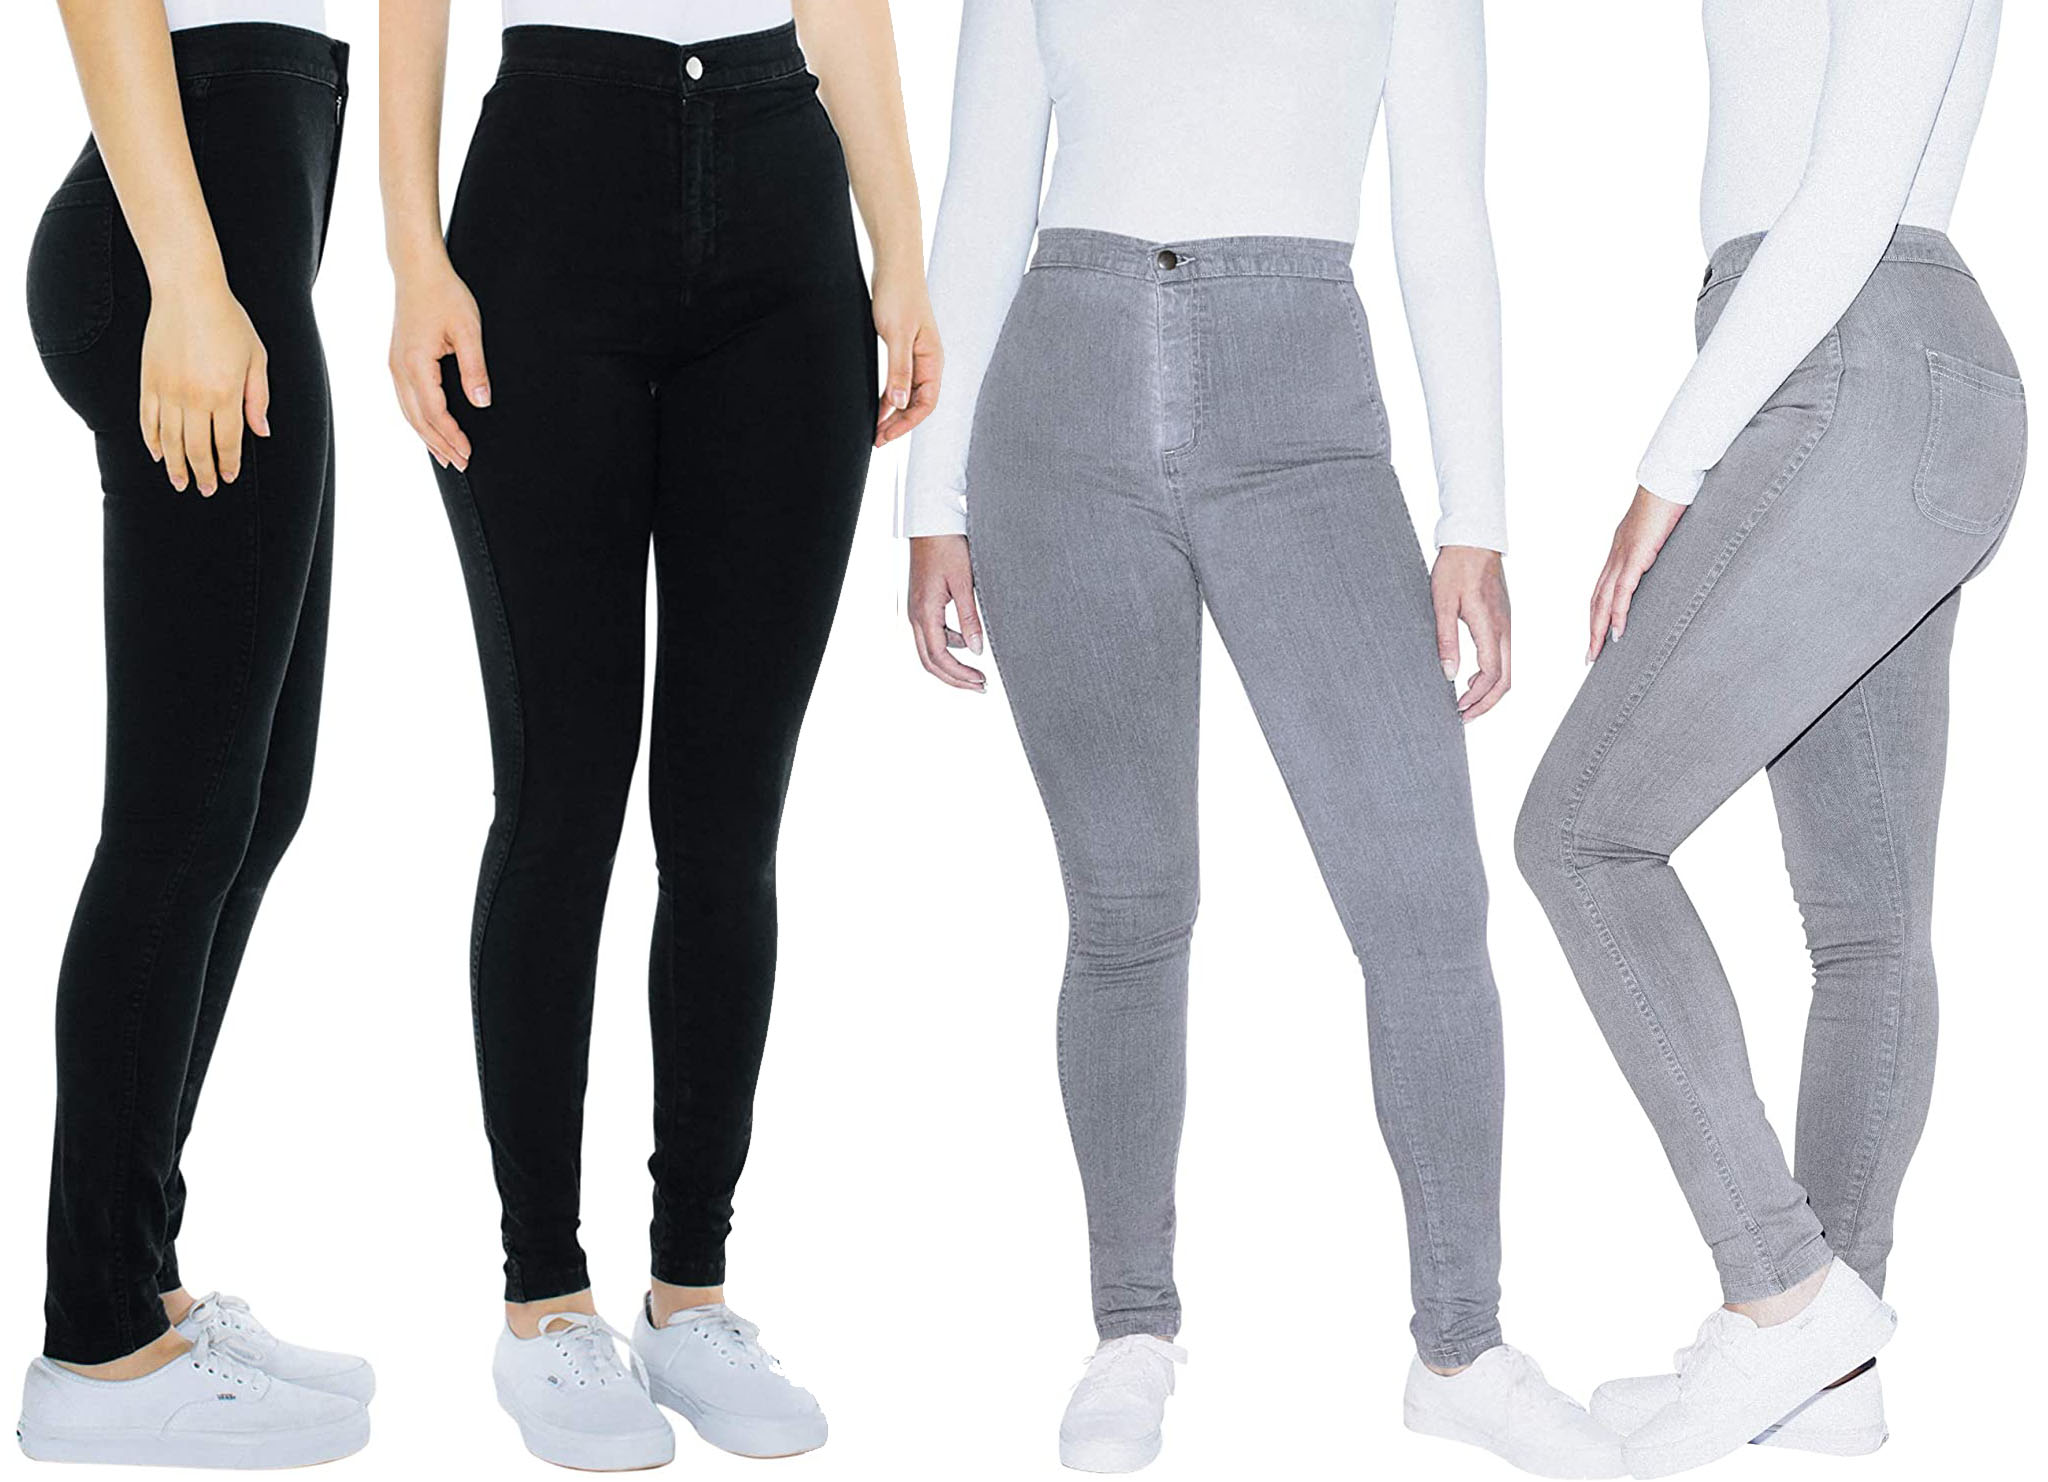 The Easy Jean is a super skinny yet stretchy, lightweight, and soft jean